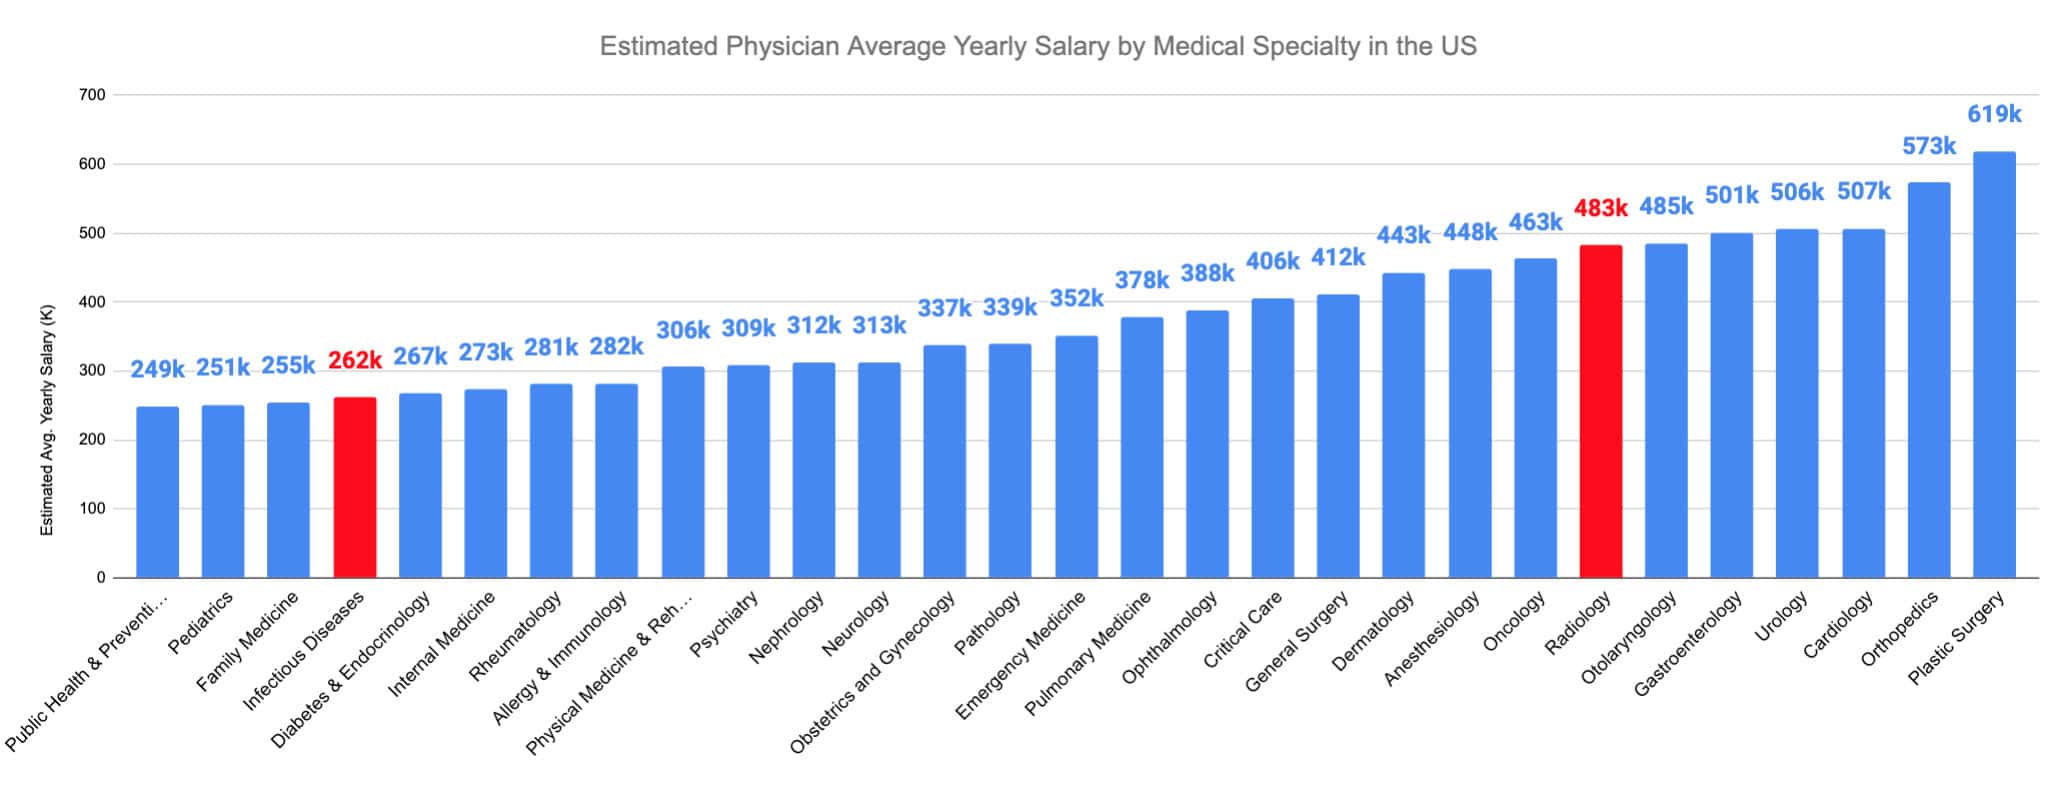 Radiology vs. Infectious Disease Estimated Physician Average Yearly Salary by Medical Specialty in the US